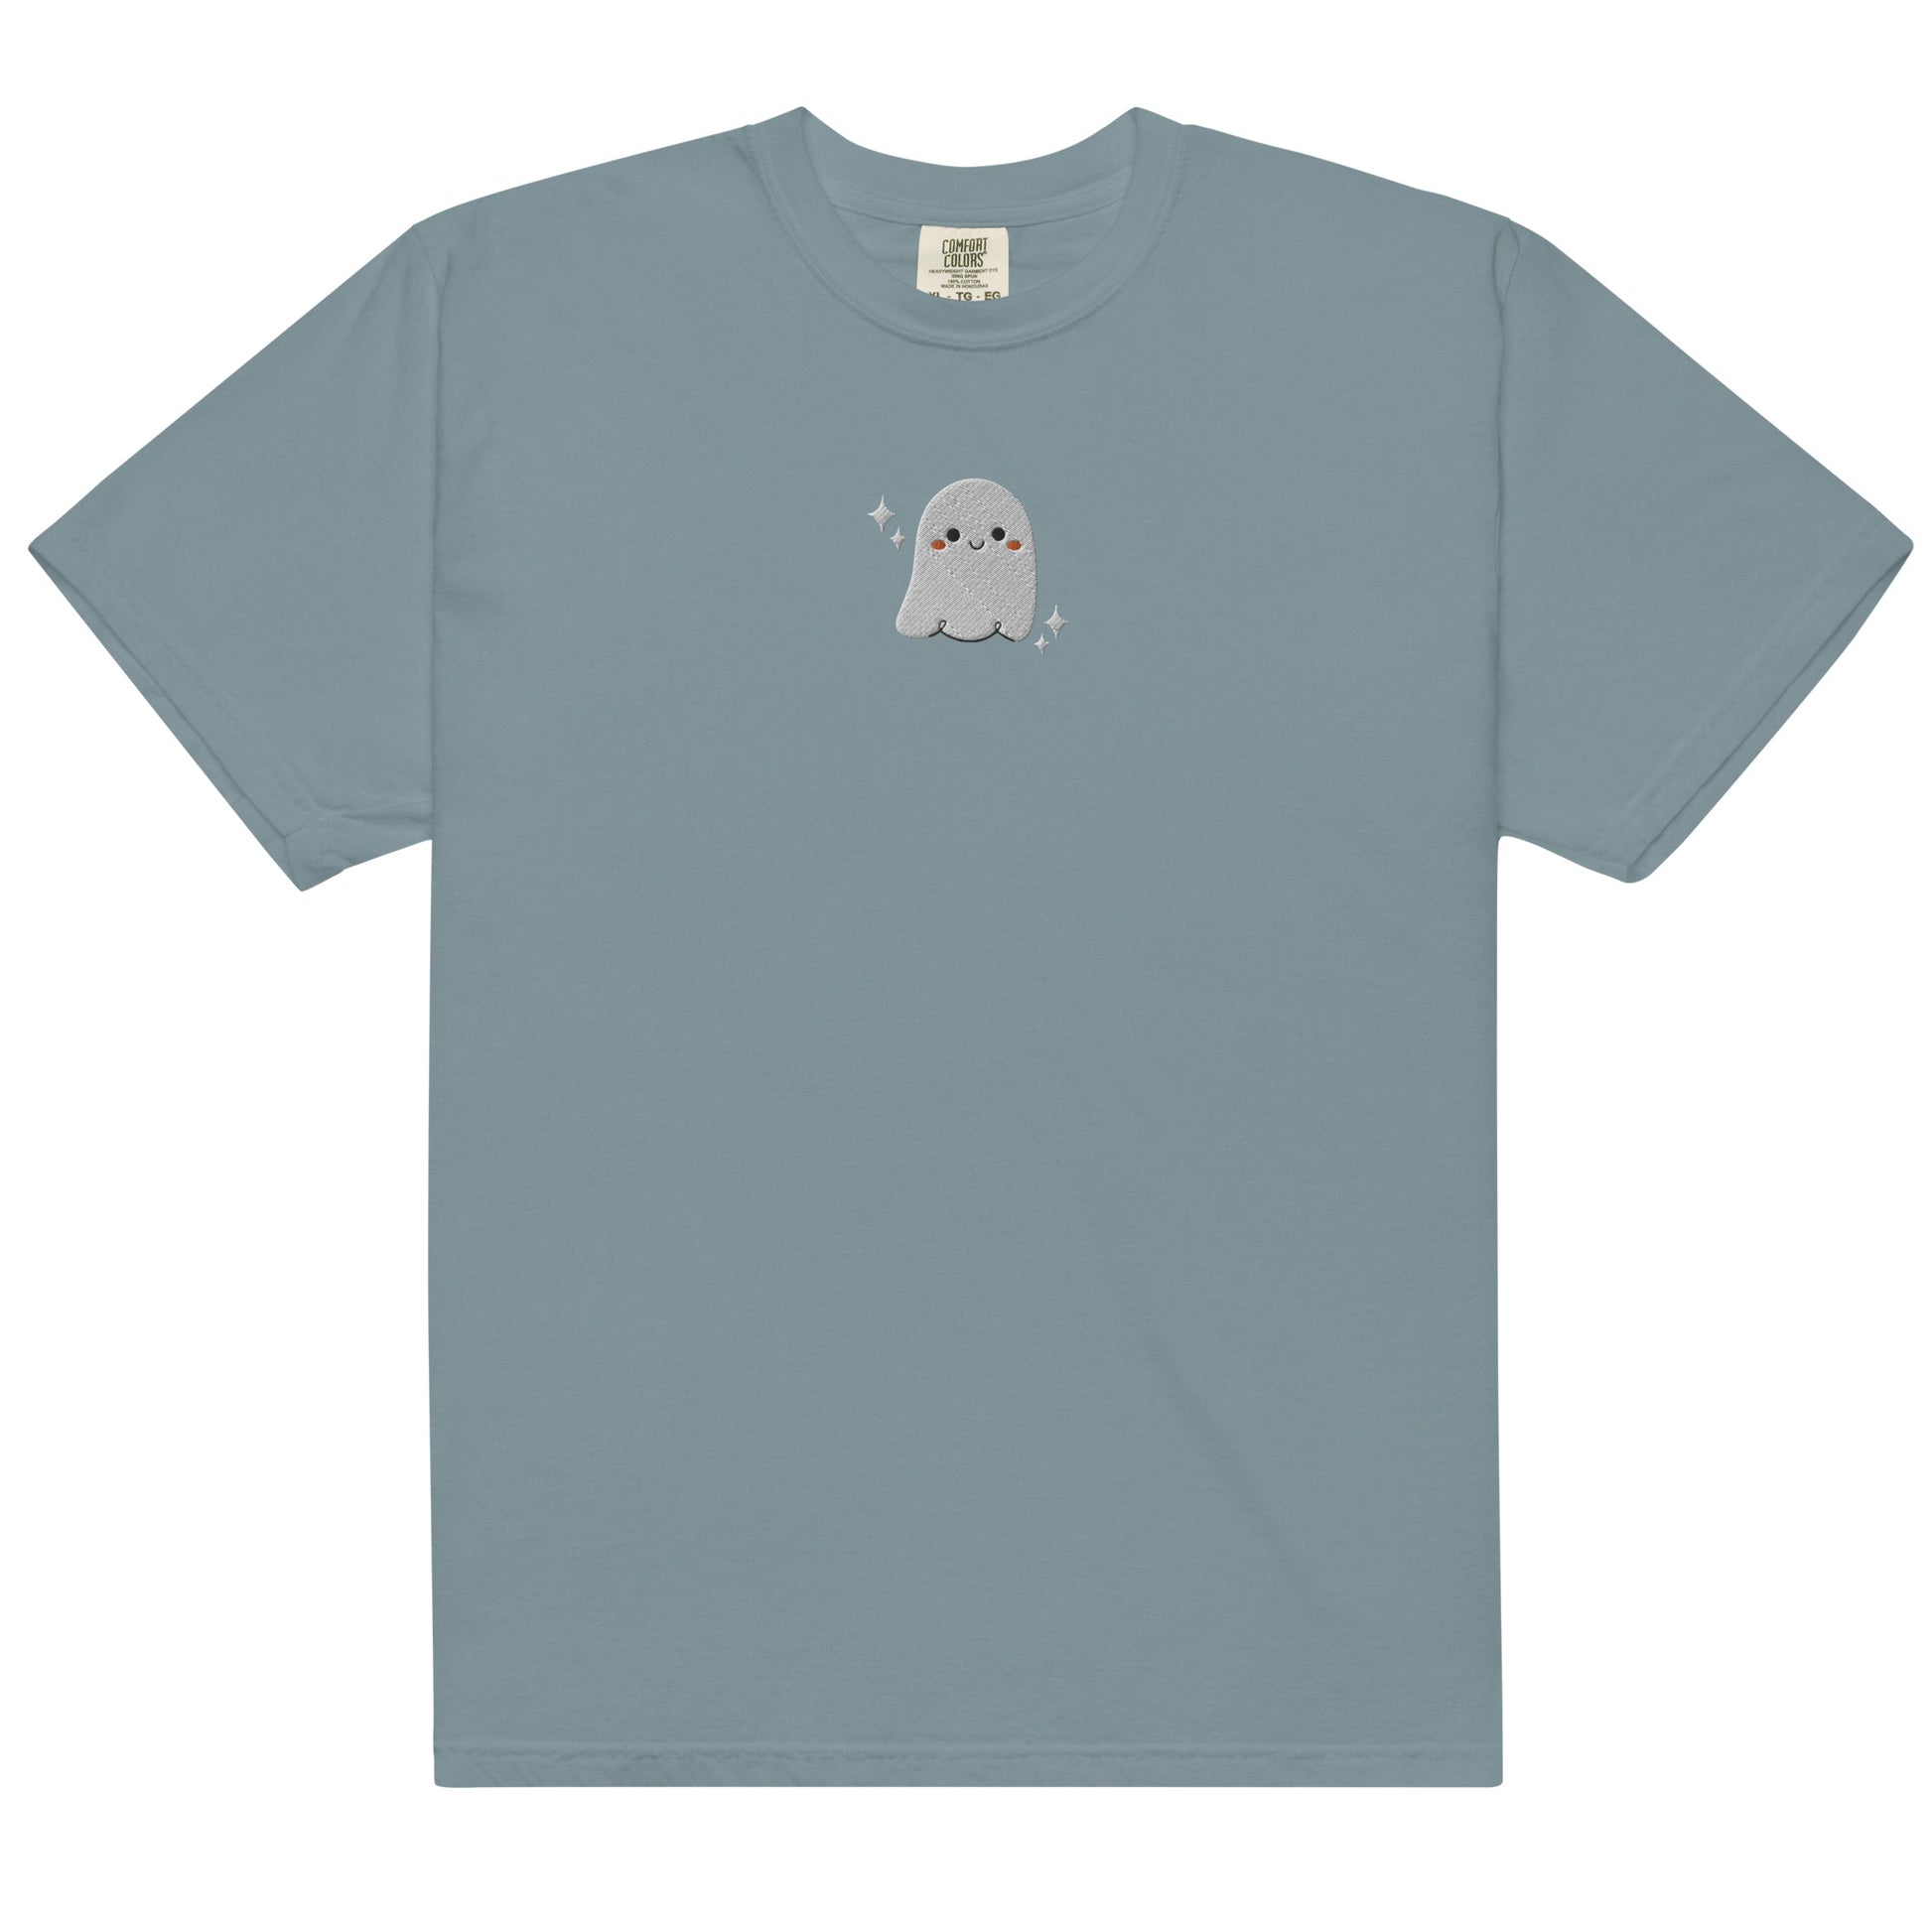 Cute Little Ghost Embroidered Men’s Sized Garment-Dyed Comfort Colors Heavyweight T-Shirt S - 3XL True Navy / 3XL